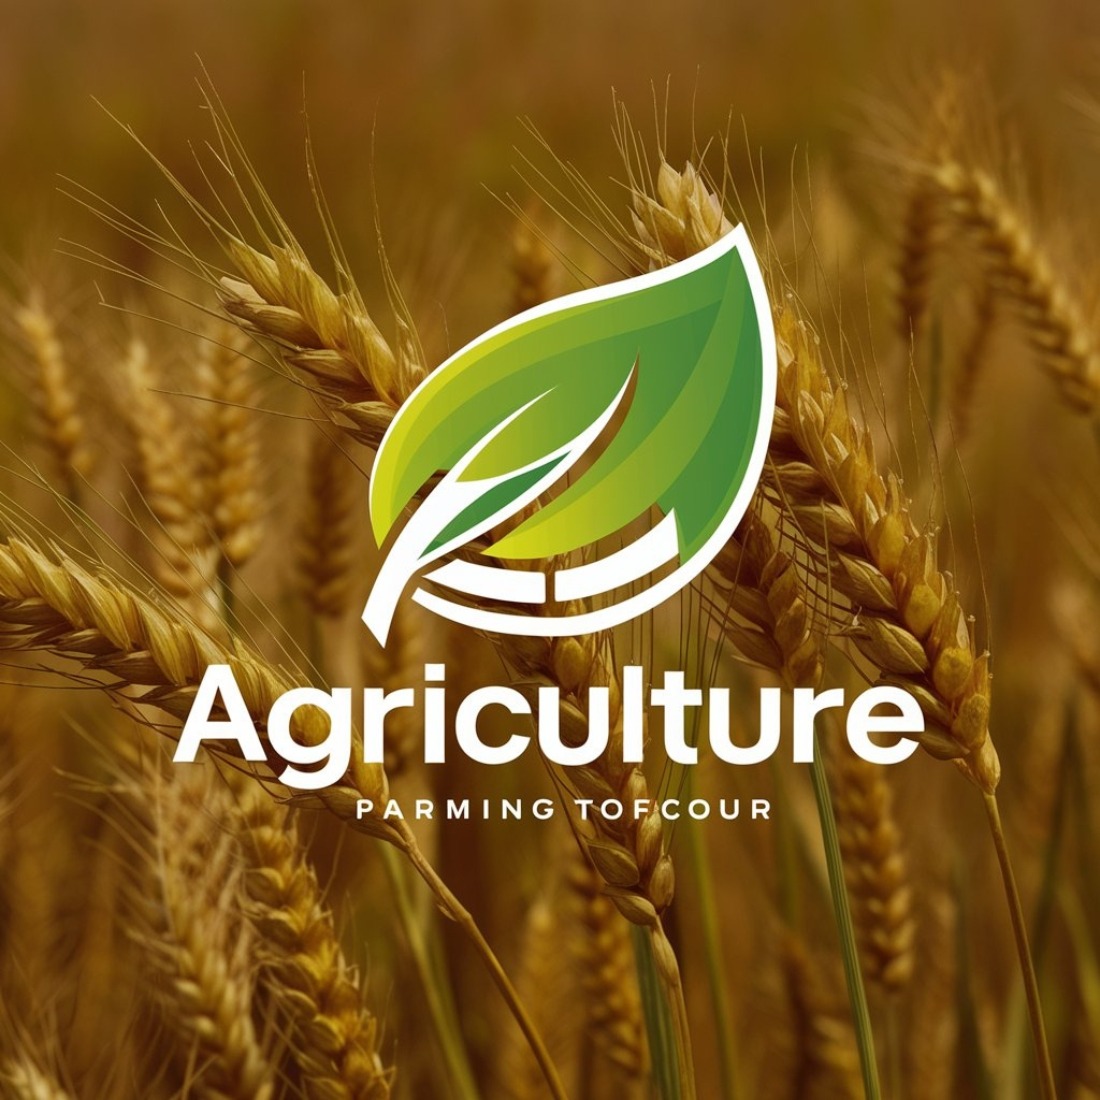 Agriculture Logo Design cover image.